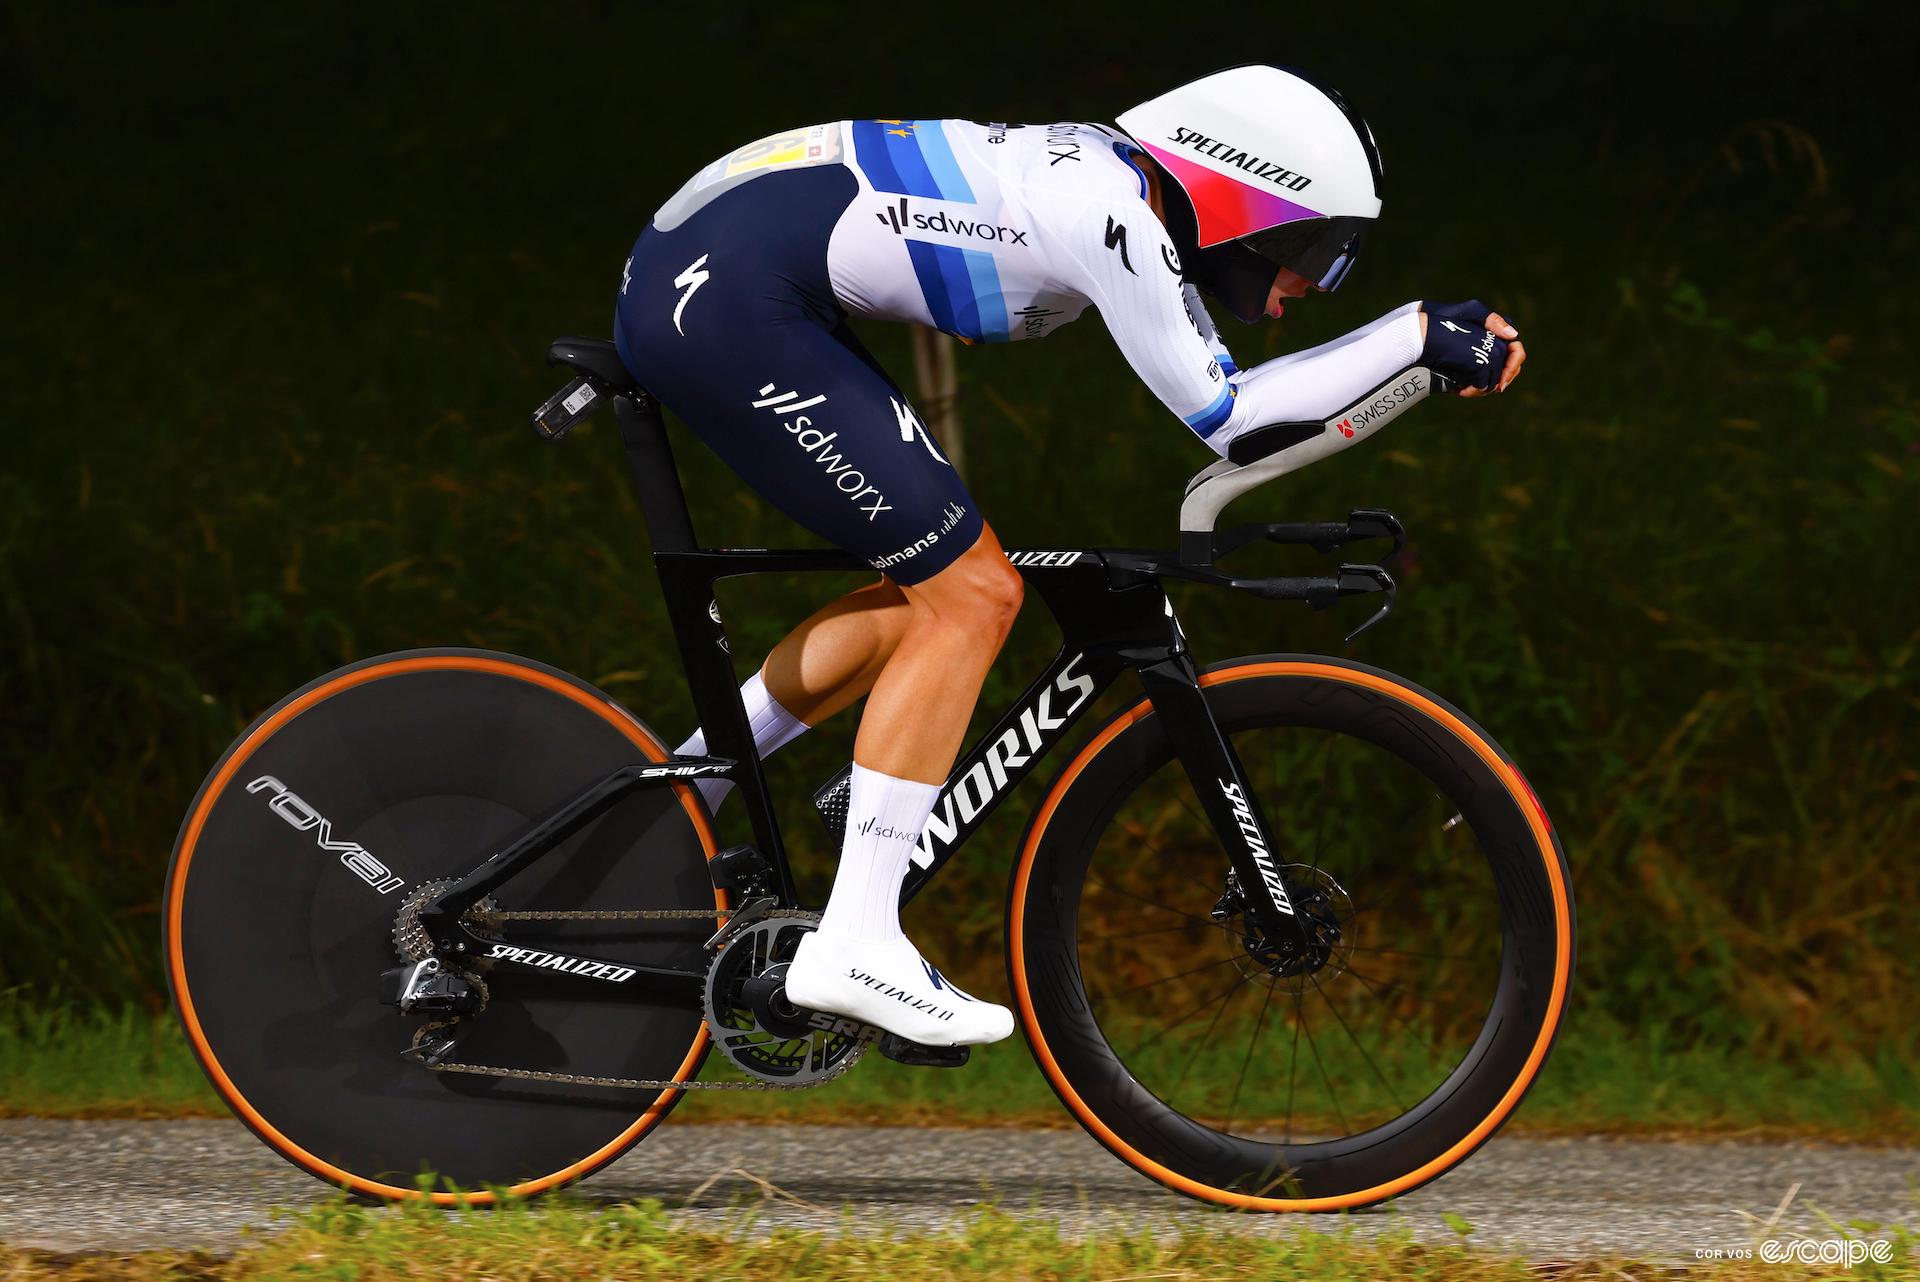 Marlen Reusser on her time trial bike at the Tour de France, viewed from the side, in a highly aerodynamic position.